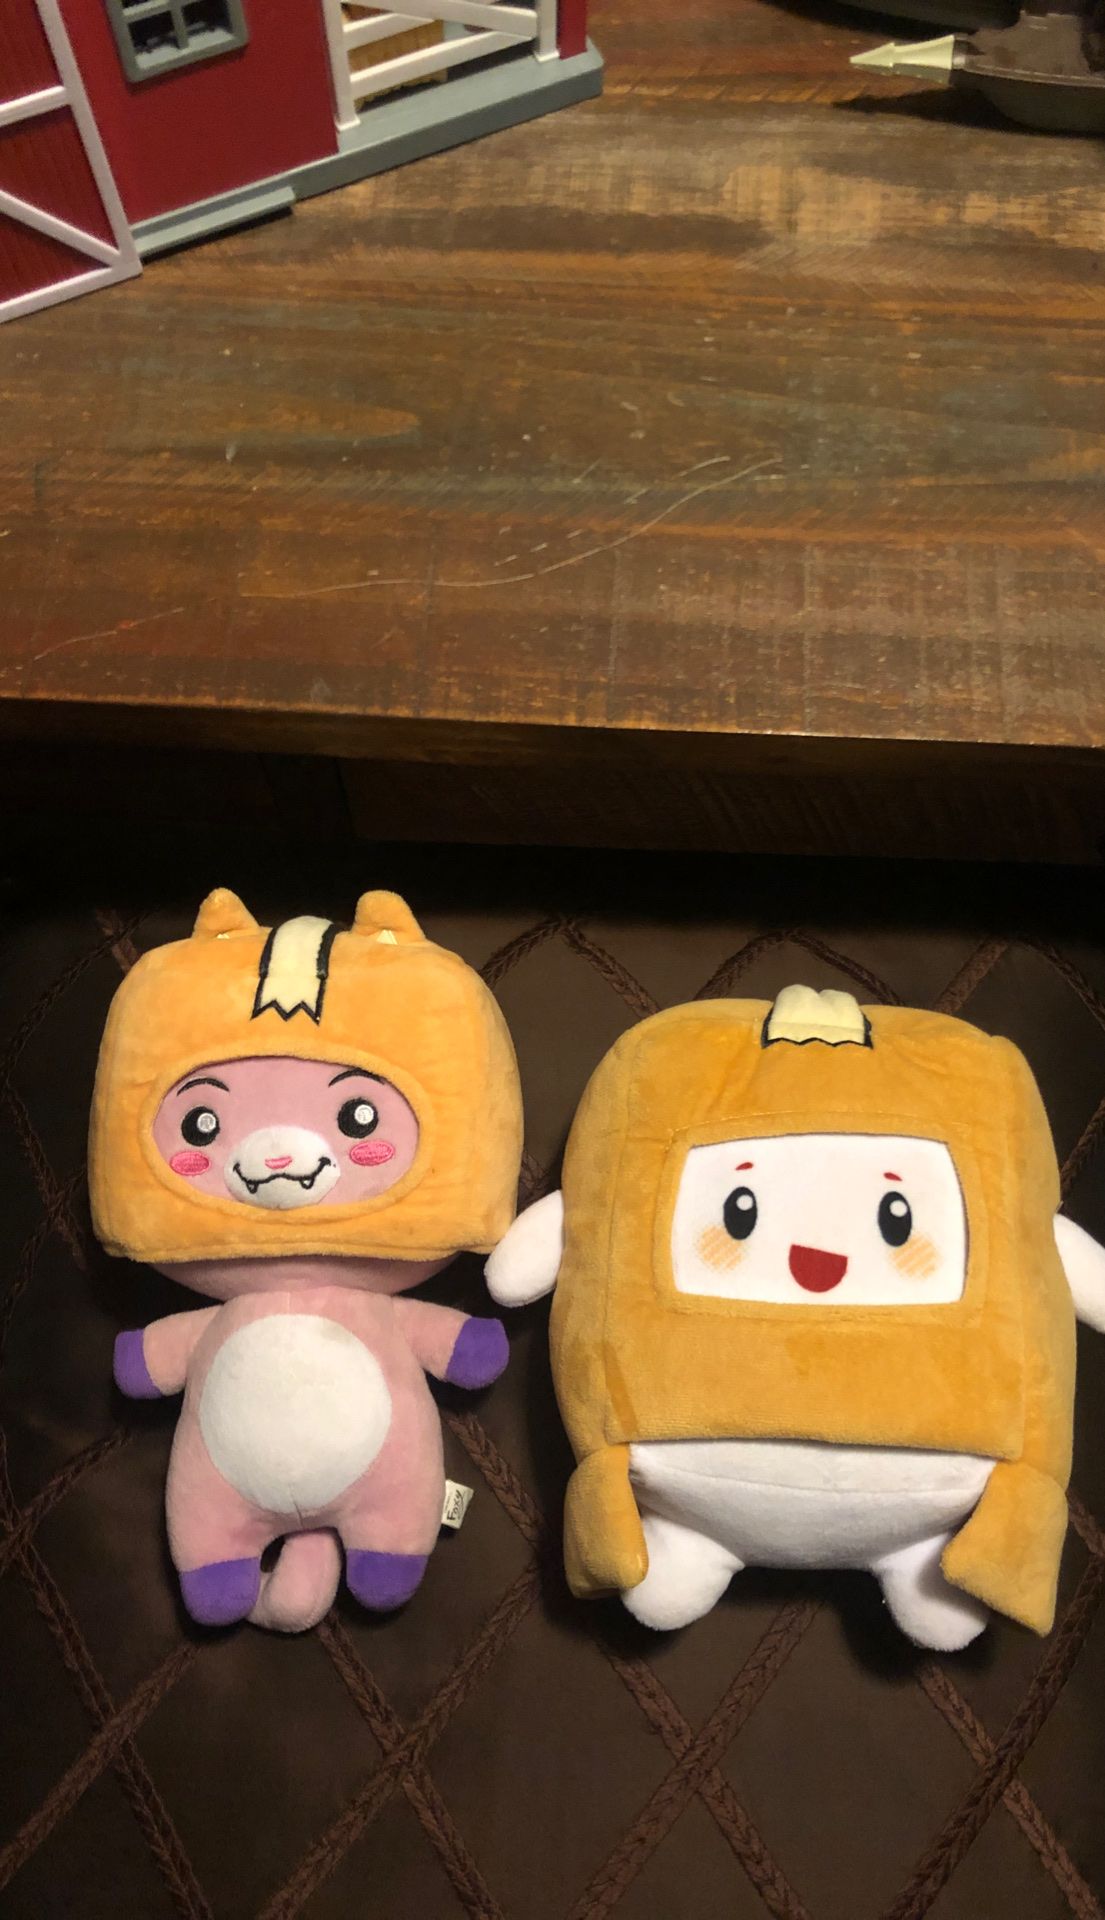 Boxy and Foxy from Lanky Box plushies